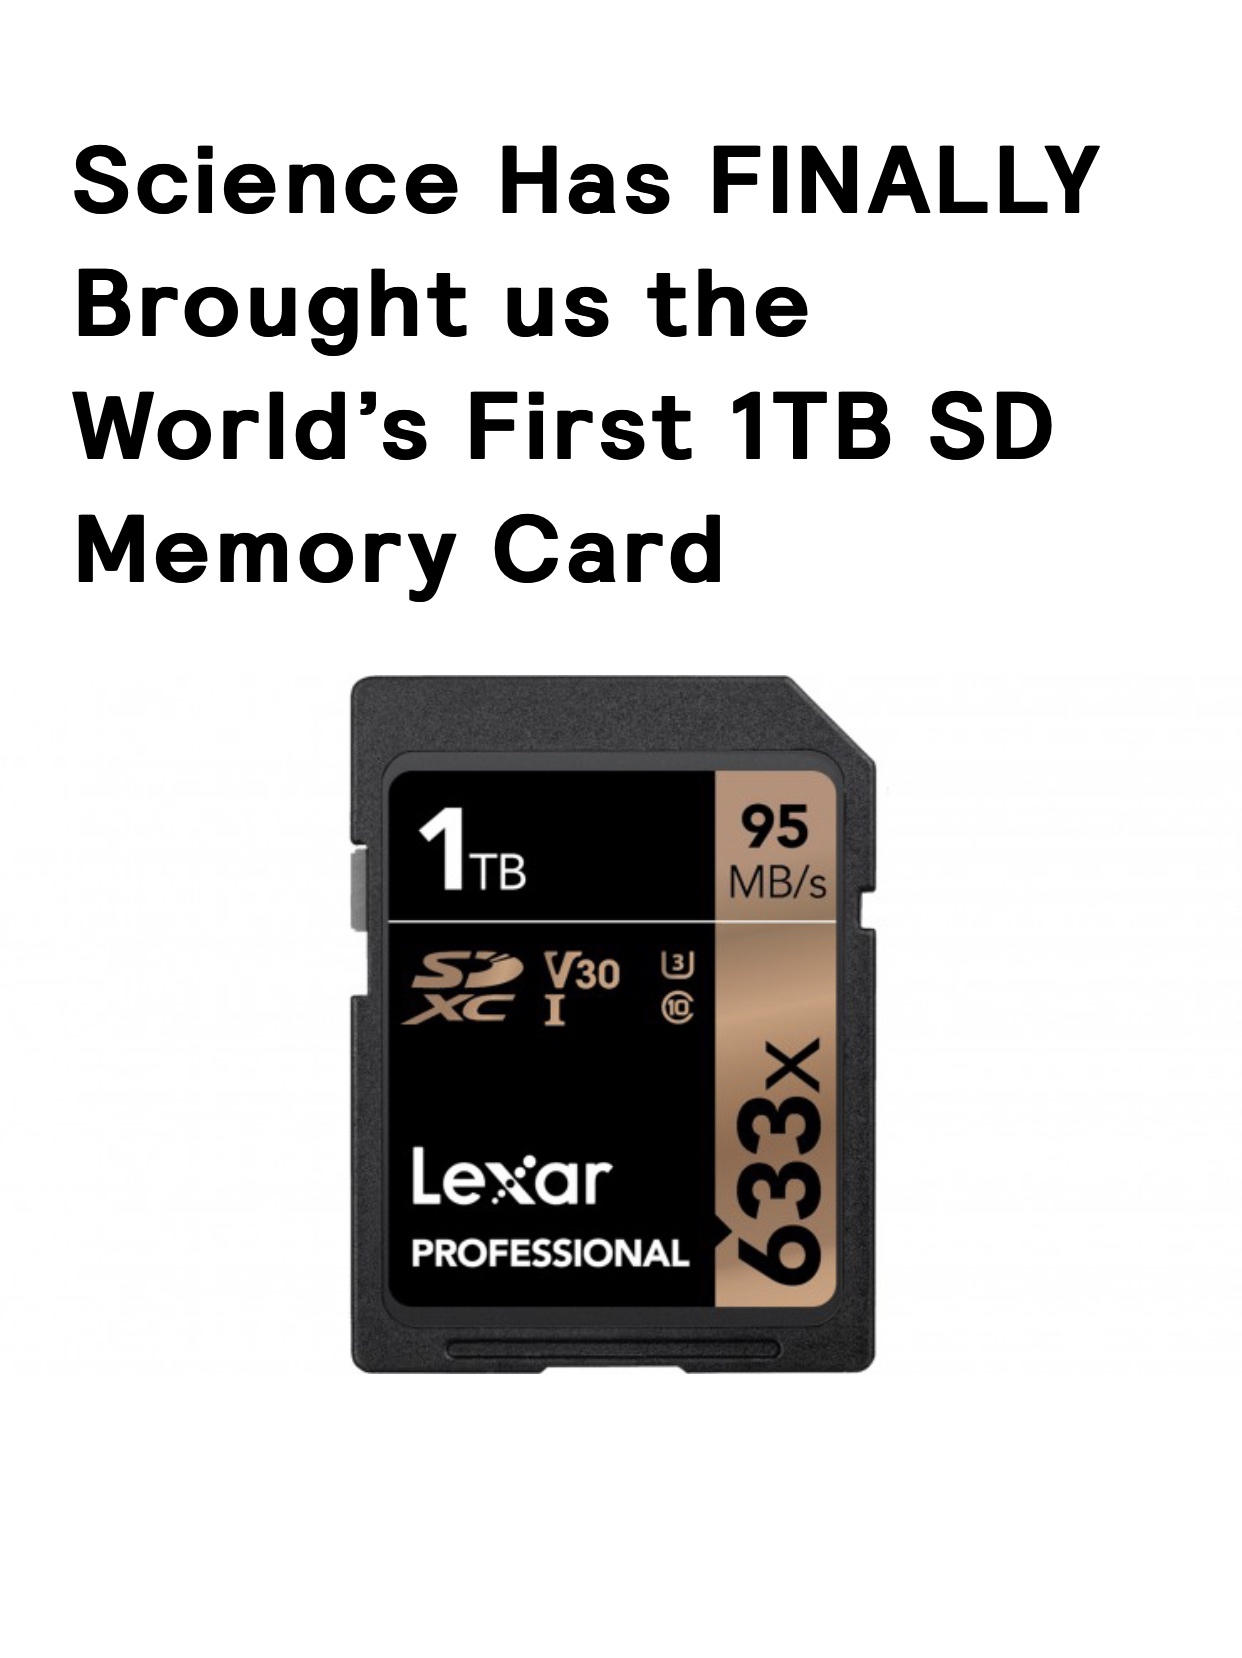 memory card - Science Has Finally Brought us the World's First 1TB Sd Memory Card 1TB 95 Mbs X V3 u Lexar Professional